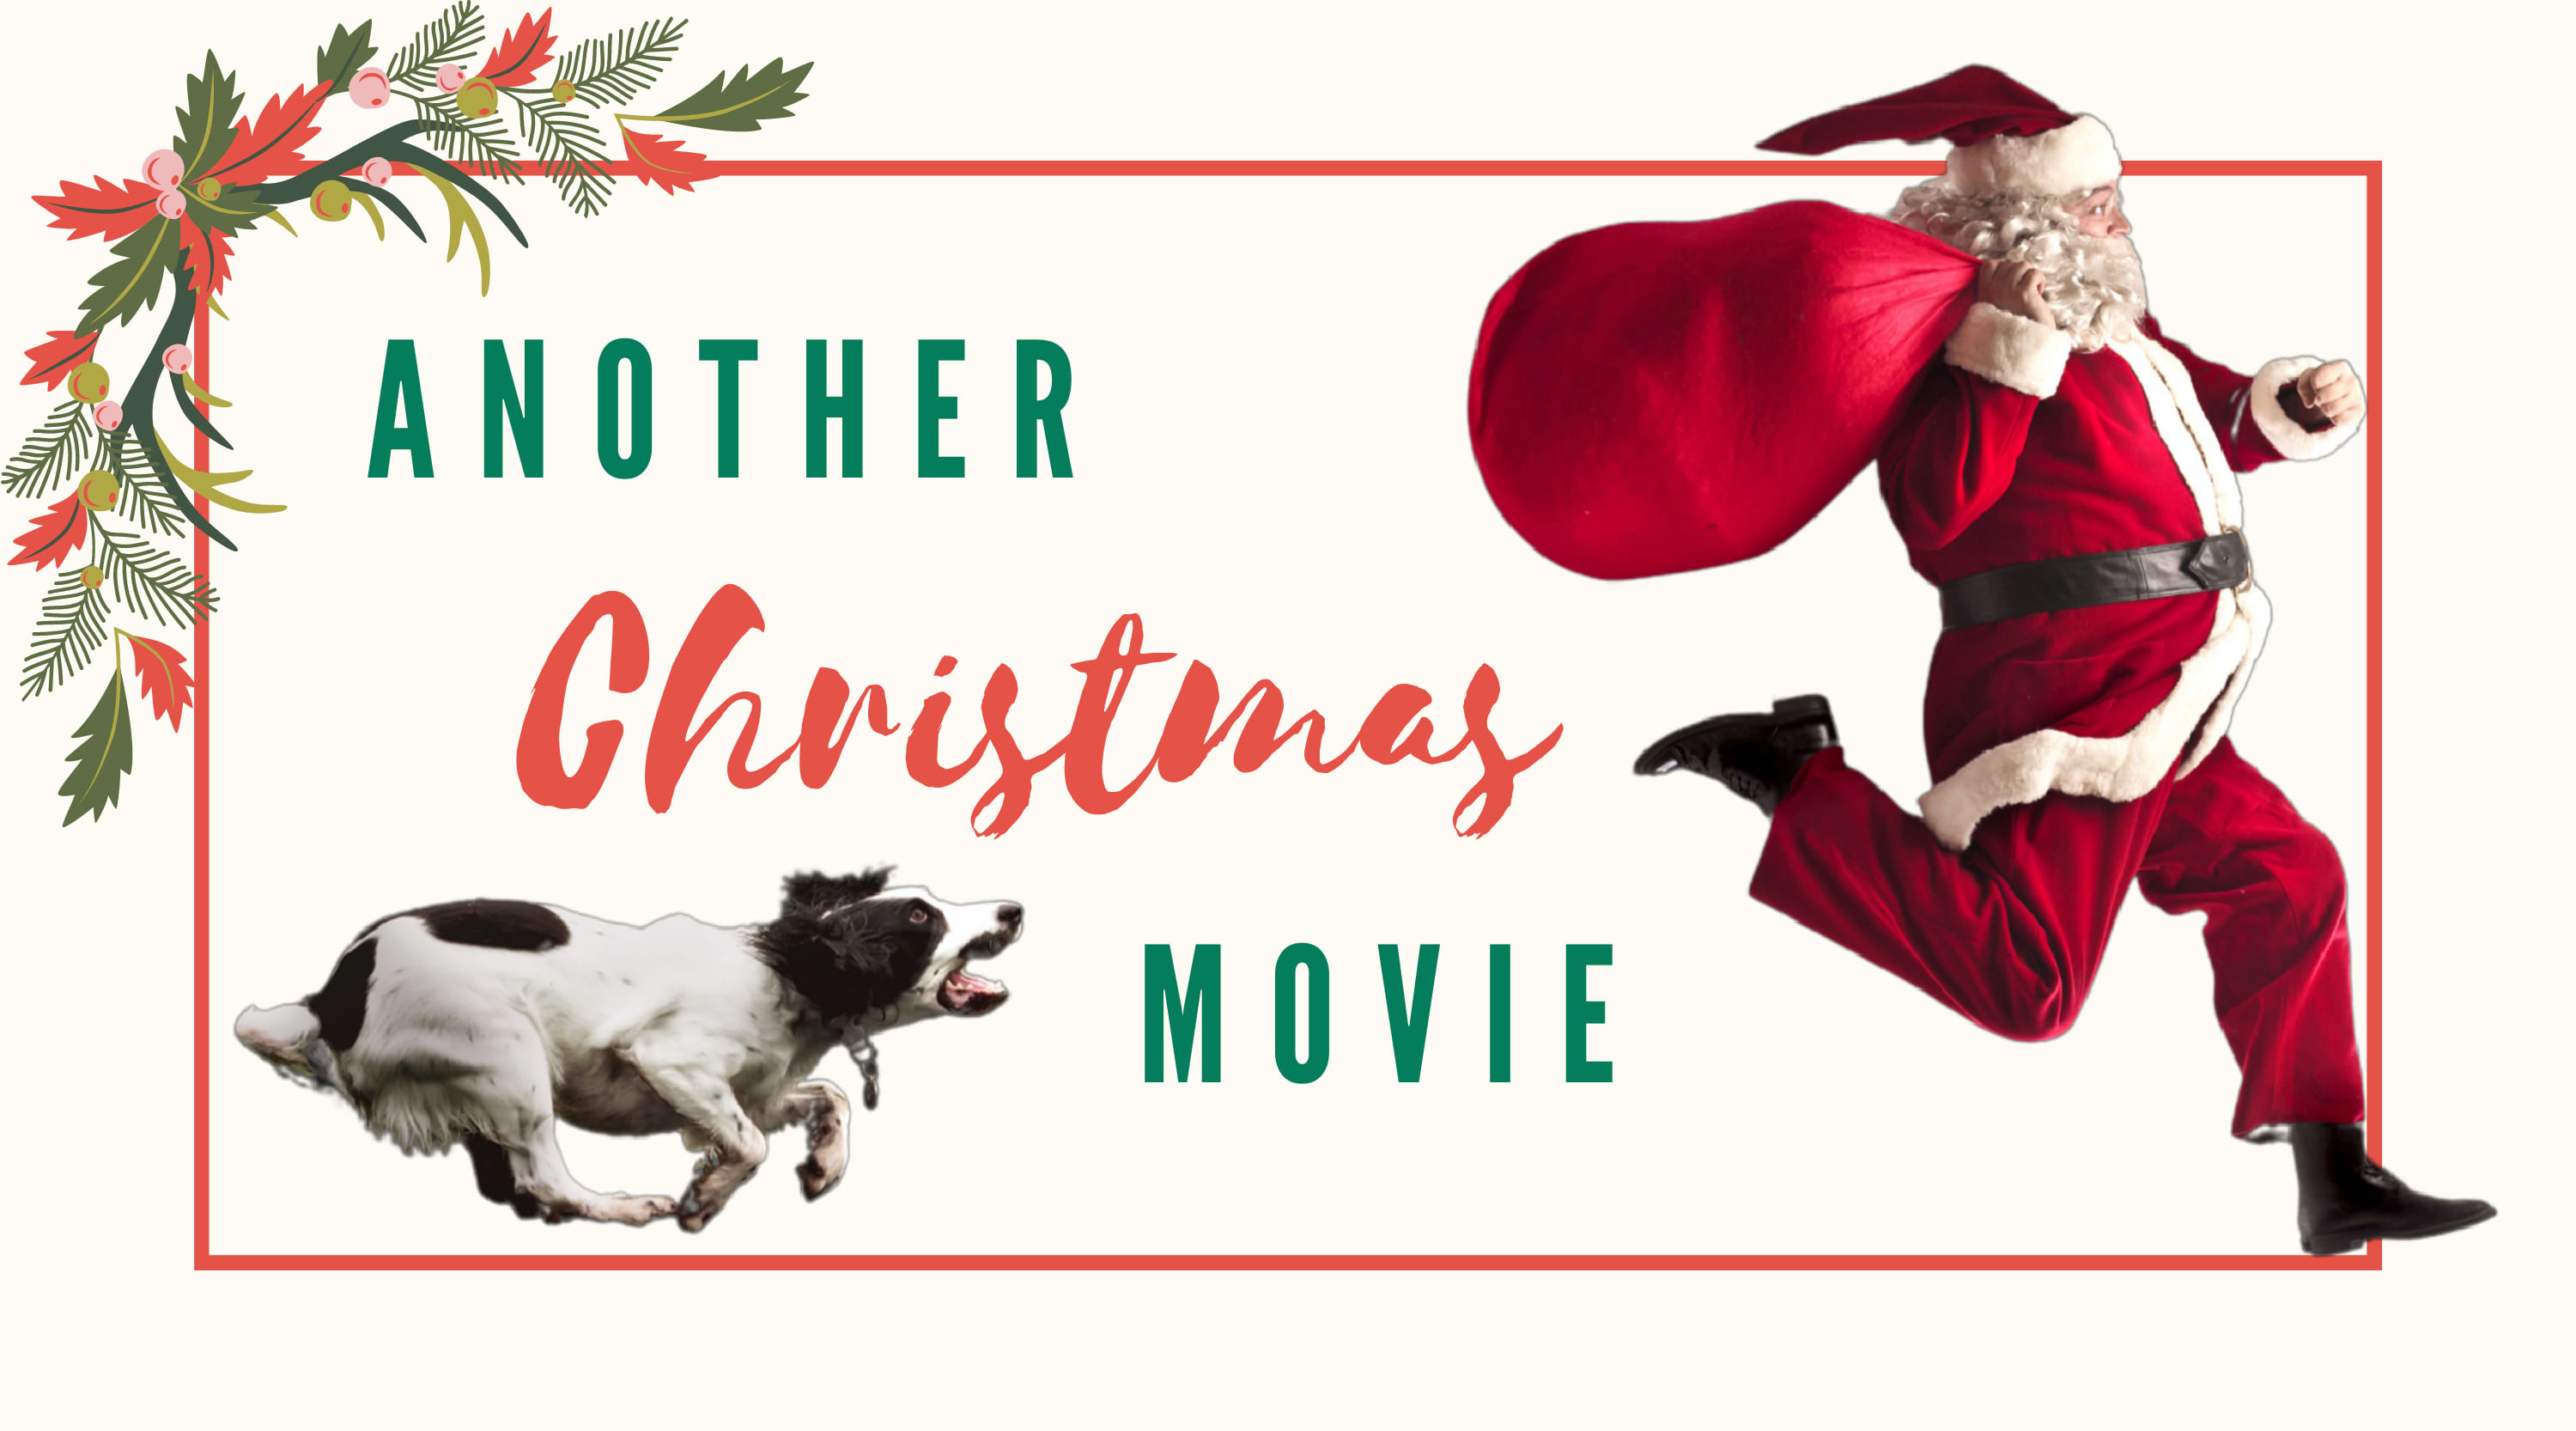 Another Christmas Movie